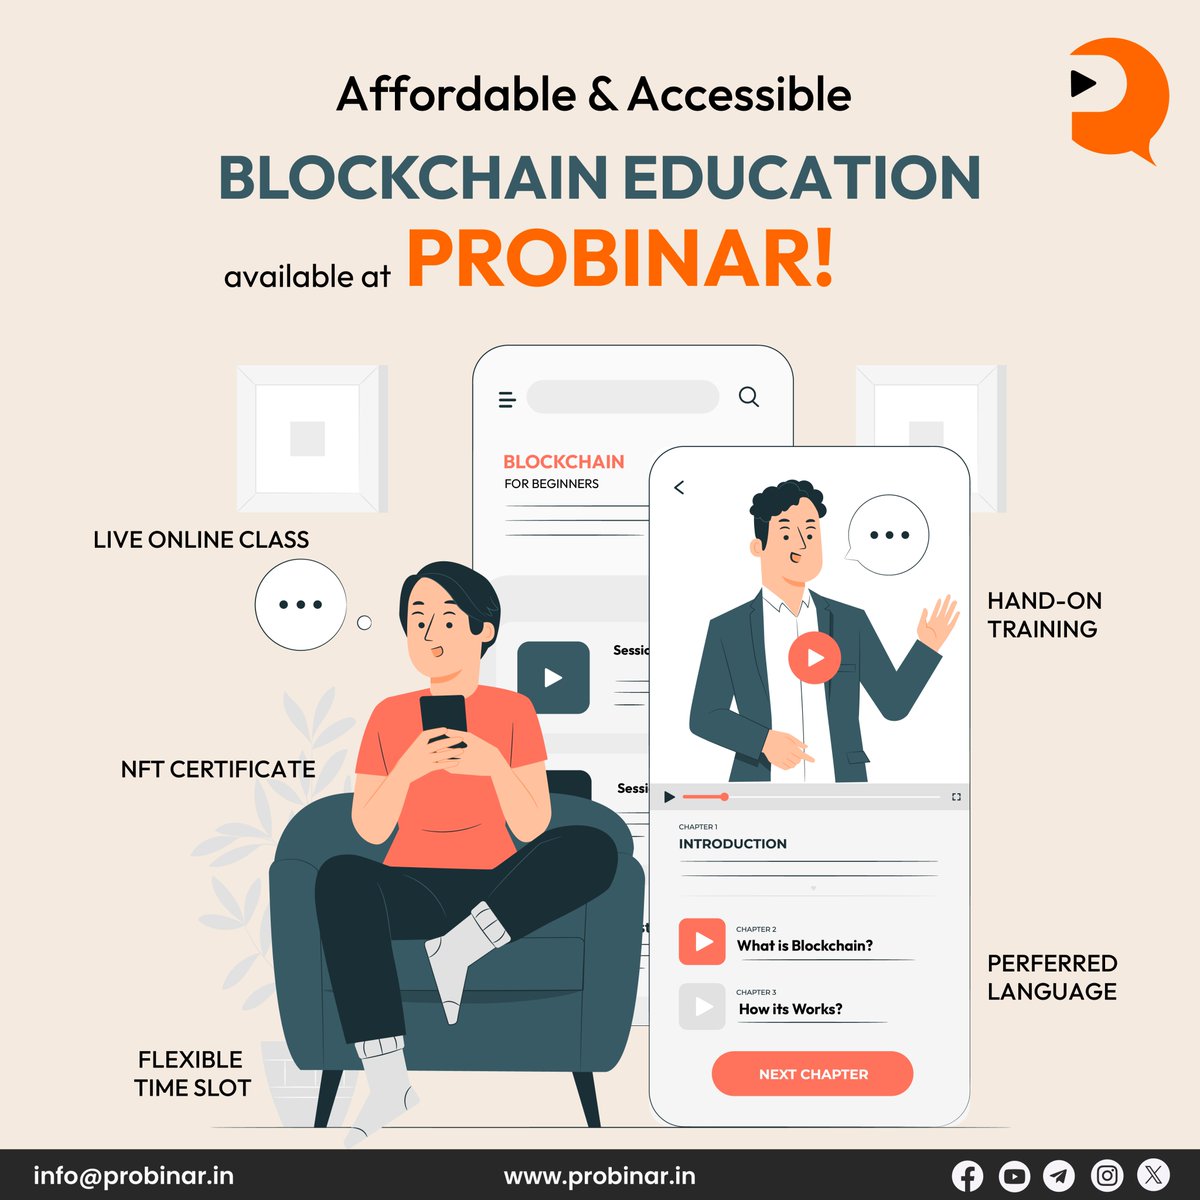 Revolutionize your understanding of blockchain with Probinar! Affordable, accessible education that reshapes your knowledge effortlessly. 

visit us: probinar.in

#bitcoin #Blockchain #CryptoEducation #Blockchain101 #LearnBlockchain #GIFTNIFTY  $GME #OpenAI